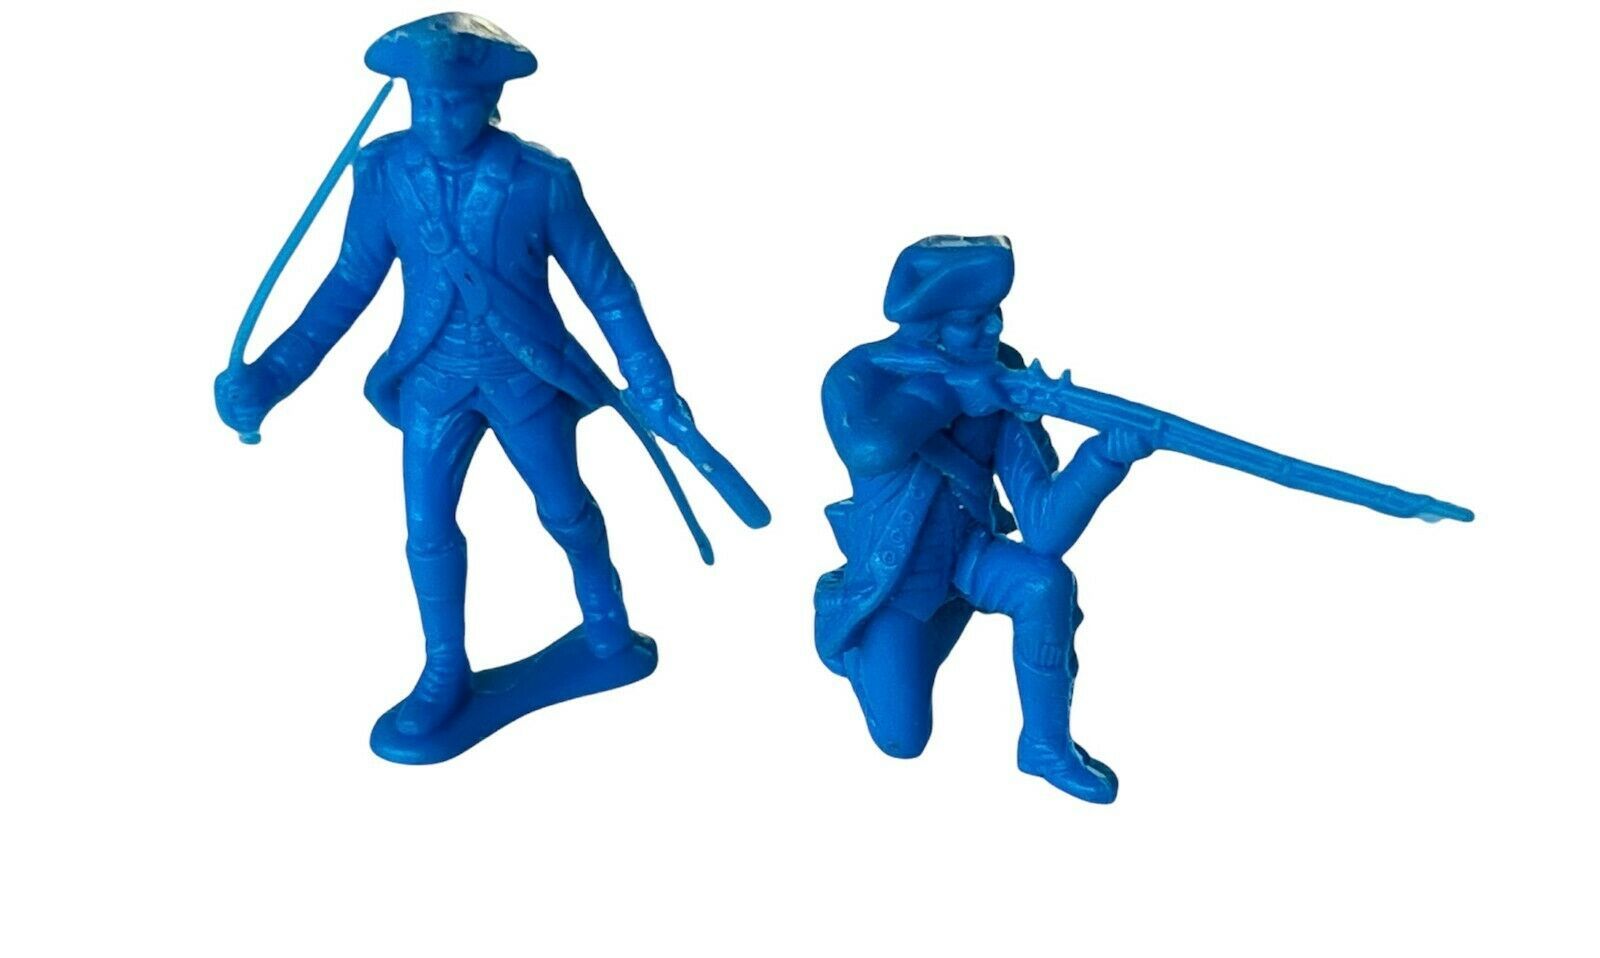 MPC Blue Revolutionary Civil War soldiers army lot vtg western toys 1960s marx 4 - $14.80